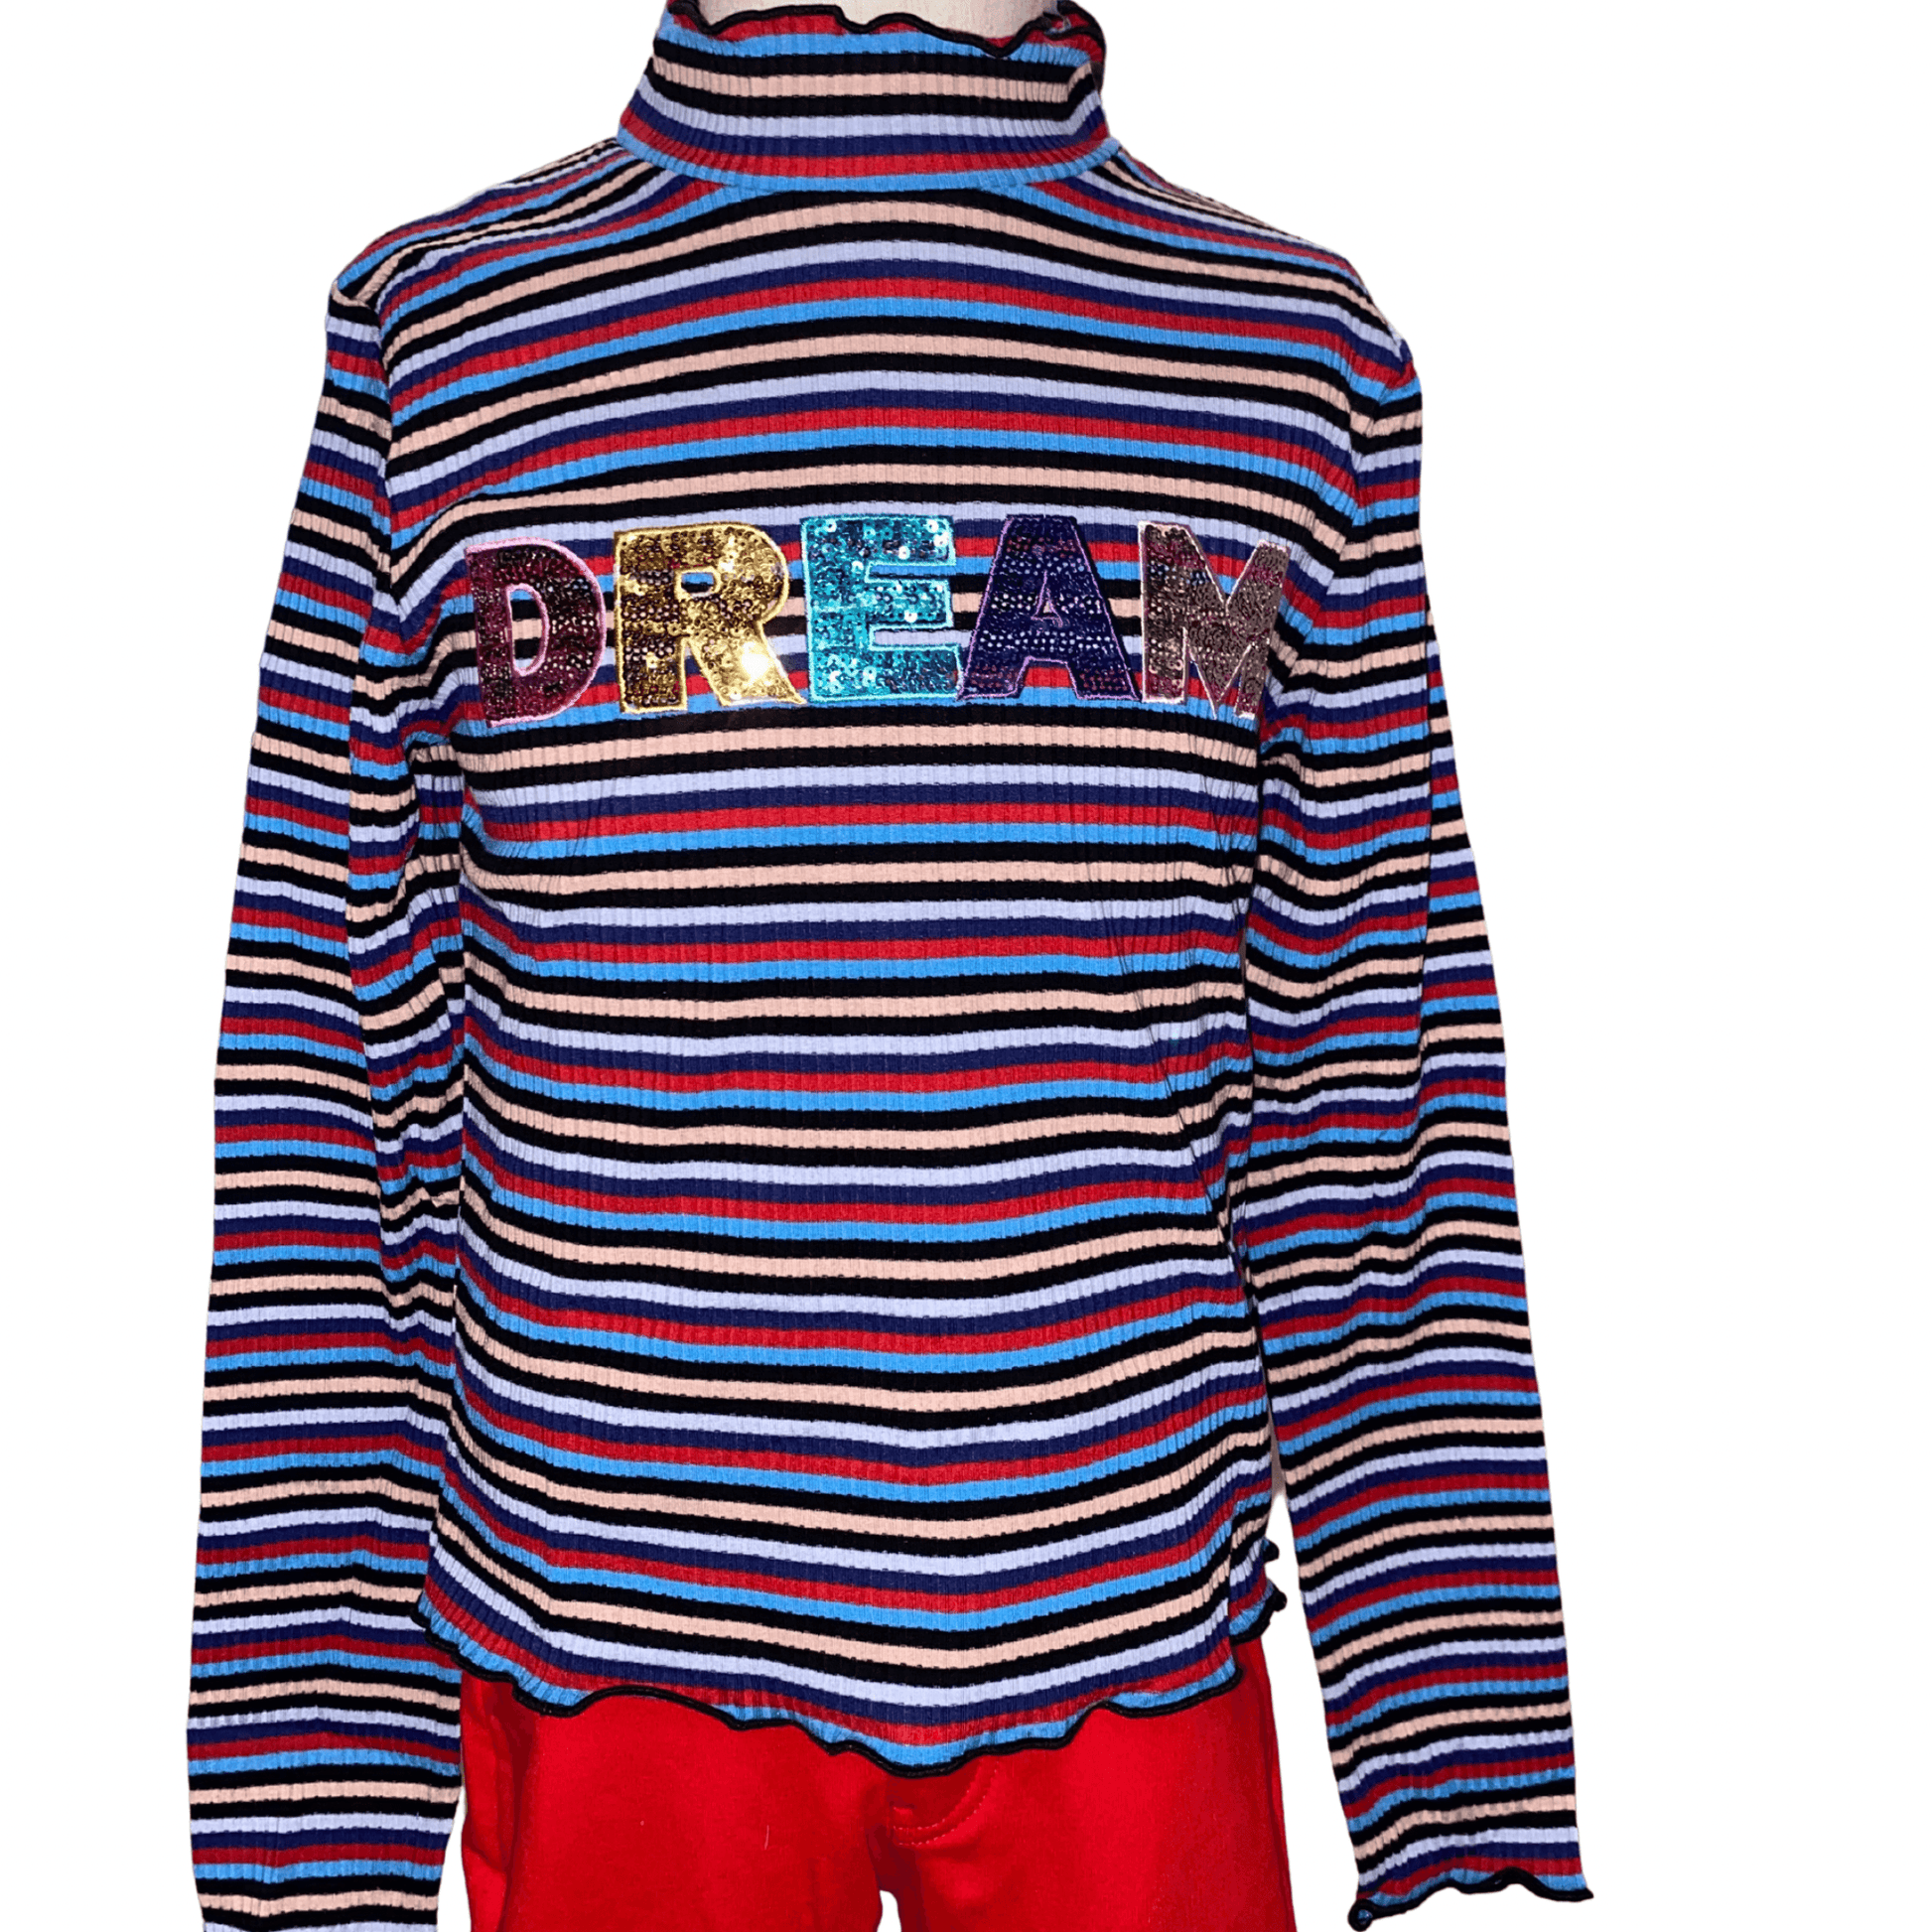 Our ruffle sleeved "DREAM" shirt is a perfect addition to the wardrobe of the little lady in your life.  This shirt features long sleeves and a mock turtle neck with scalloped edges.  This shirt has red, navy, and blue stripes with the word "DREAM" in sequins. 